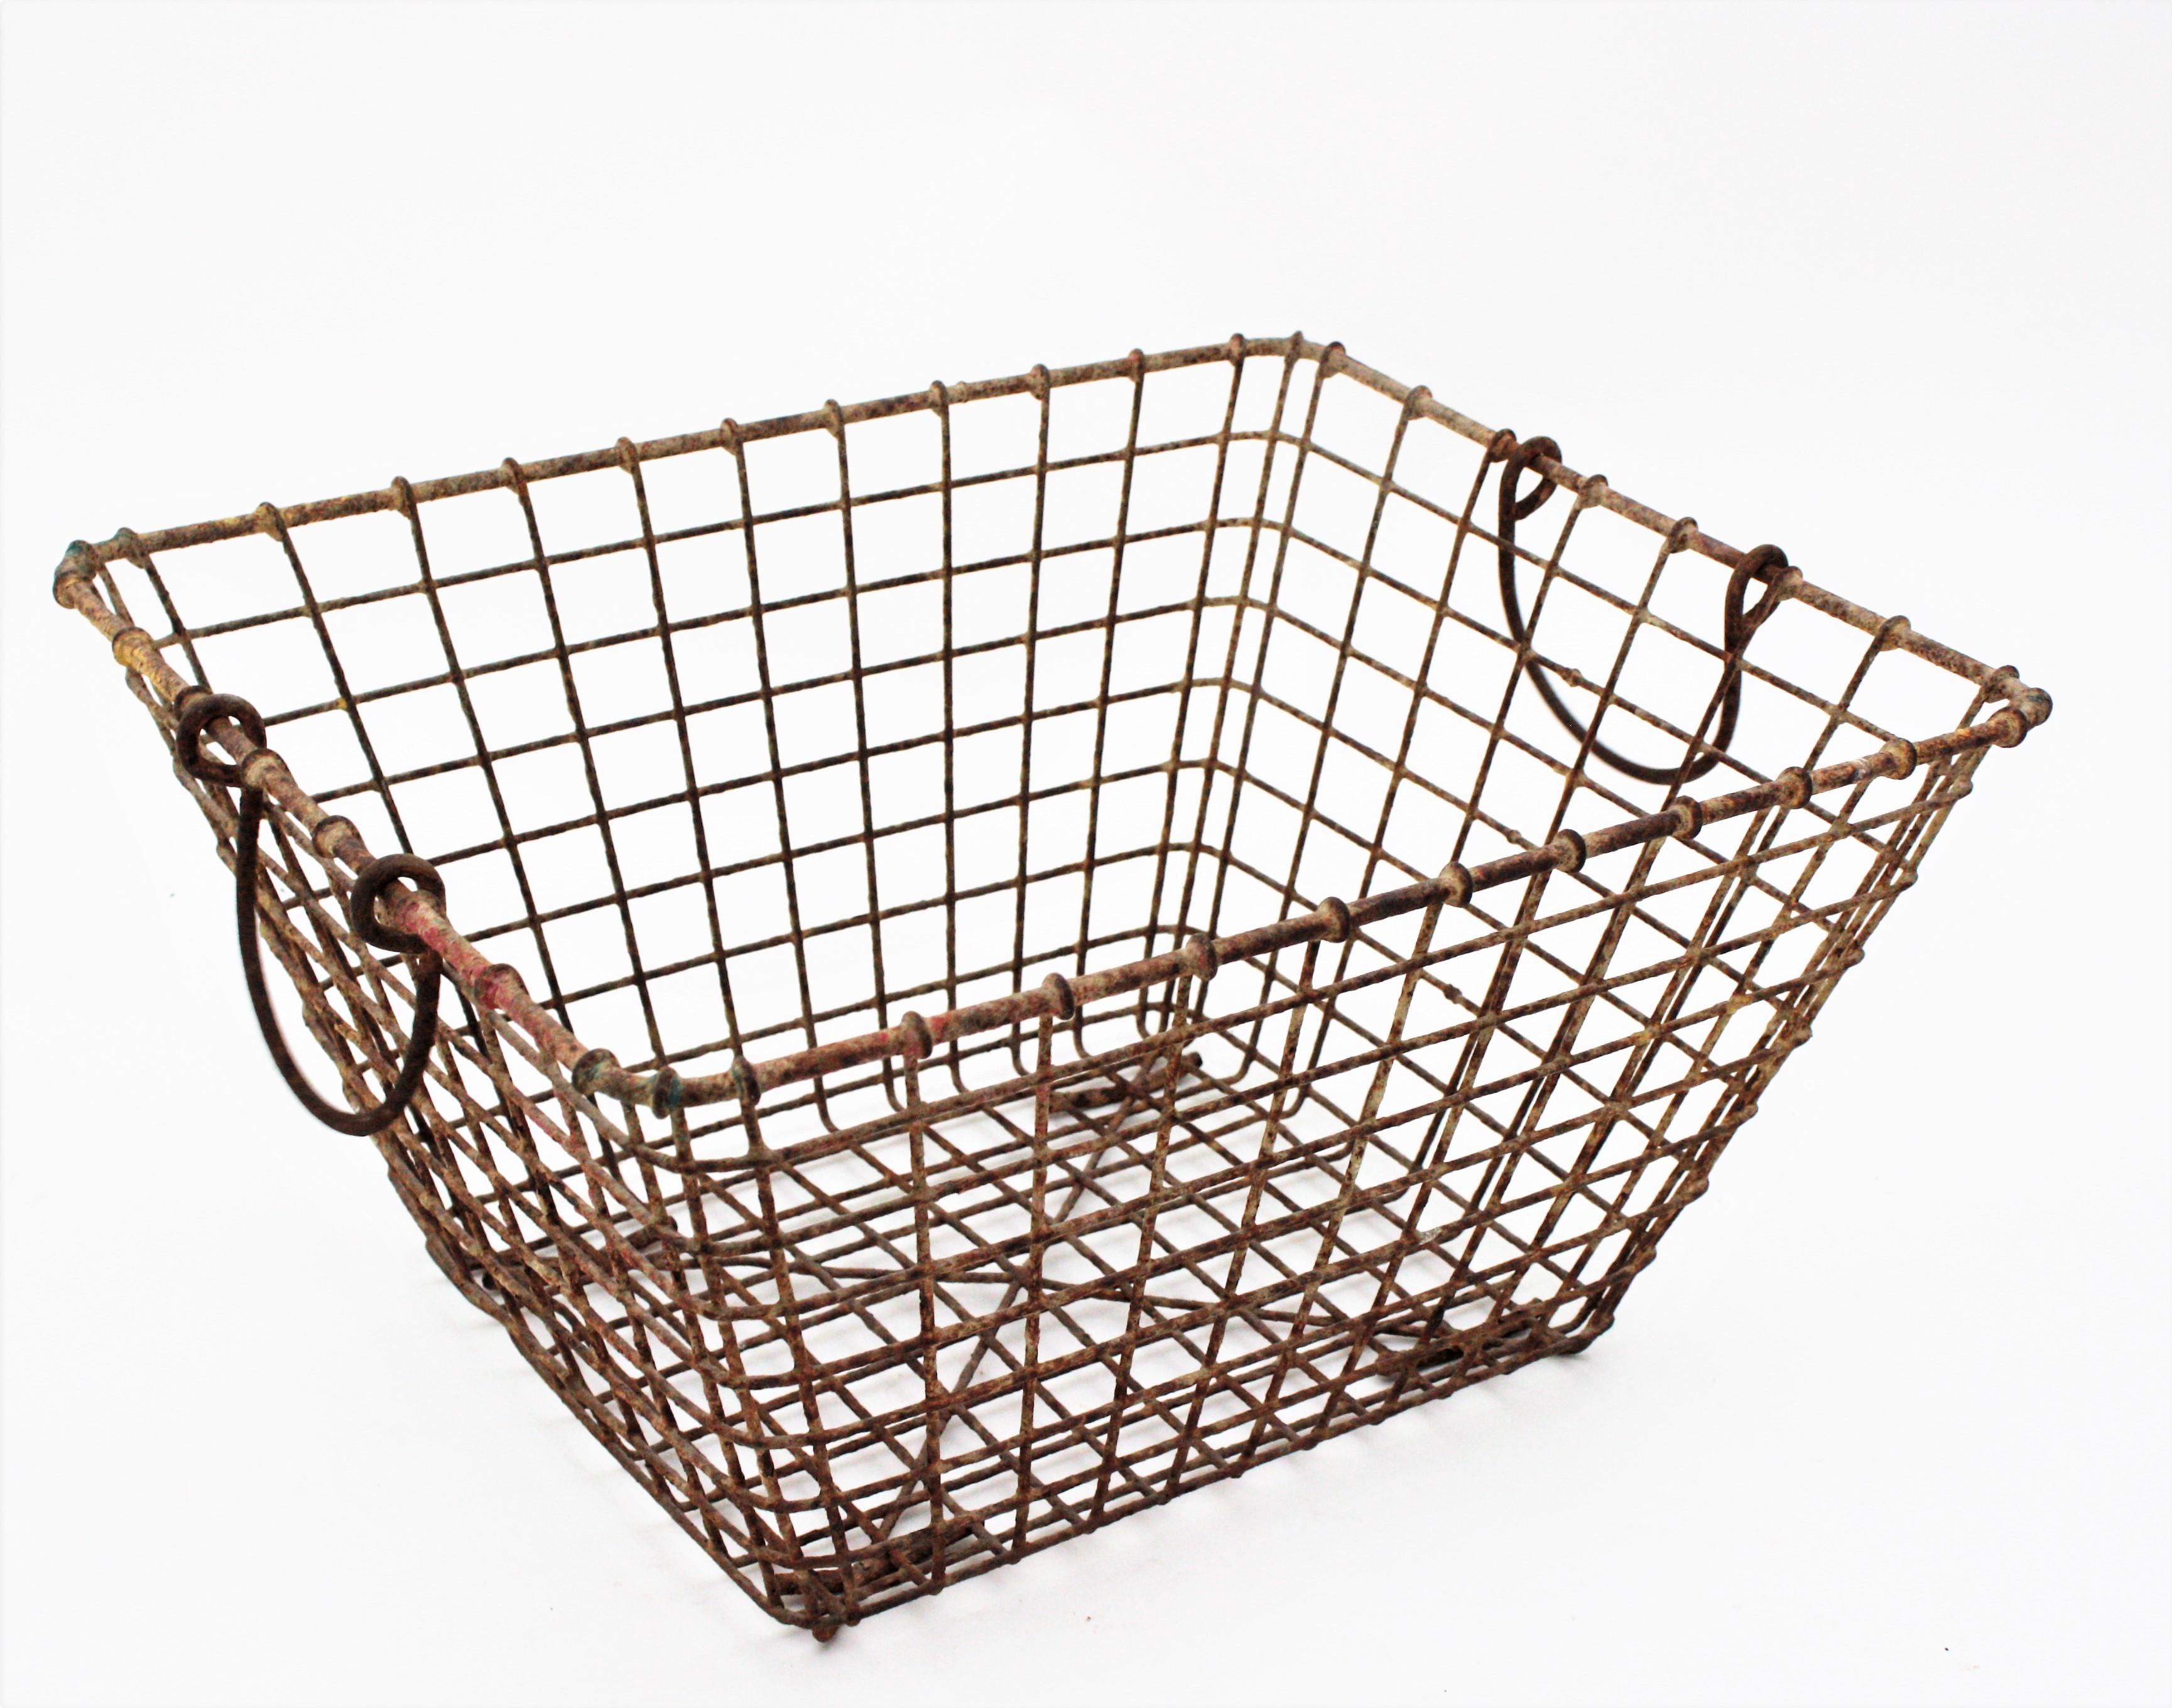 Rustic Set of Seven Coquillage Oysters Baskets in Iron Wire For Sale